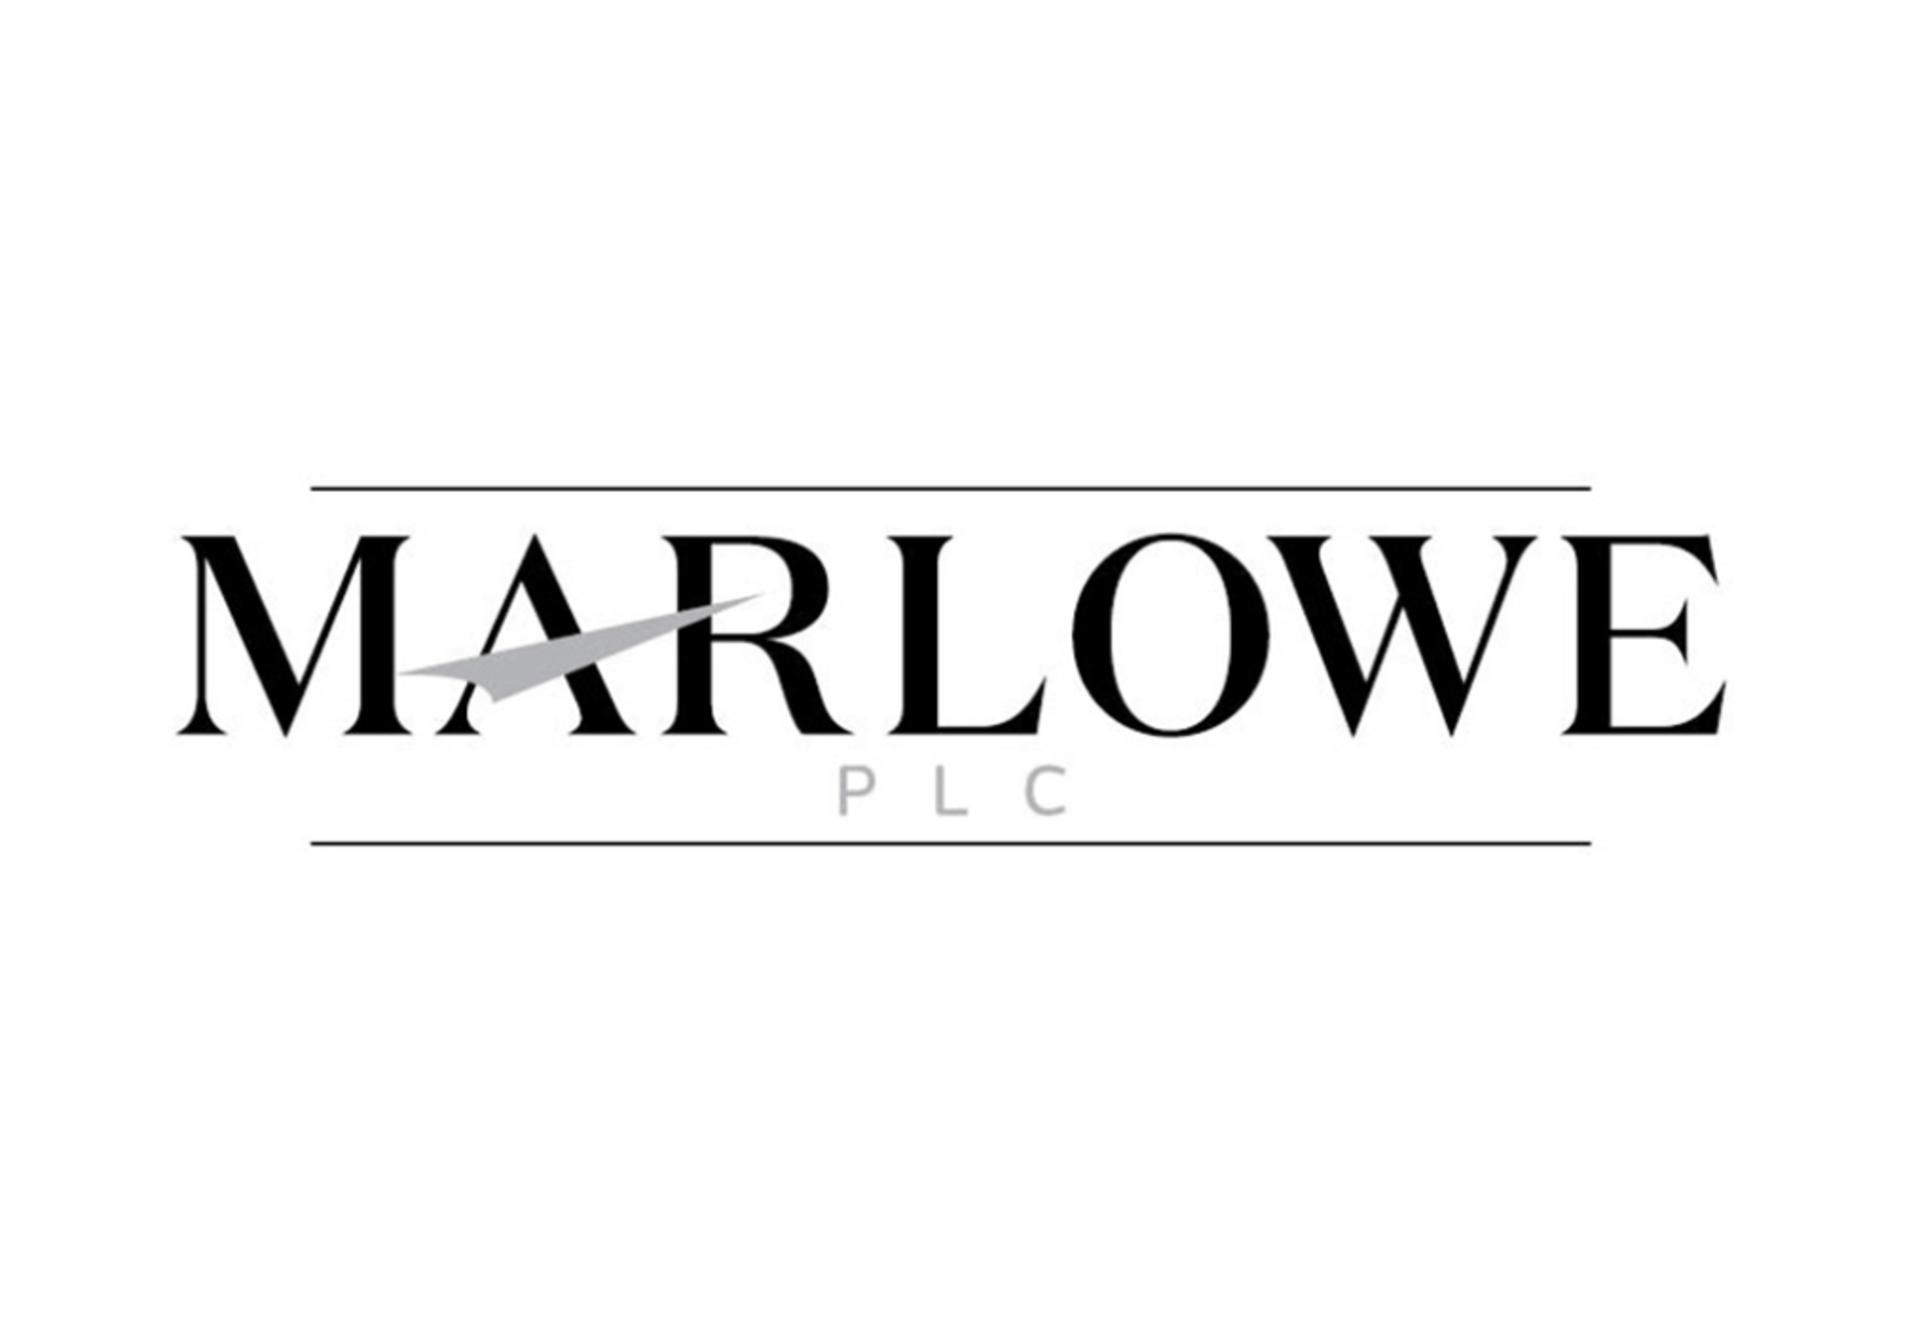 Marlowe boosts profits 31 per cent after acquisition spree